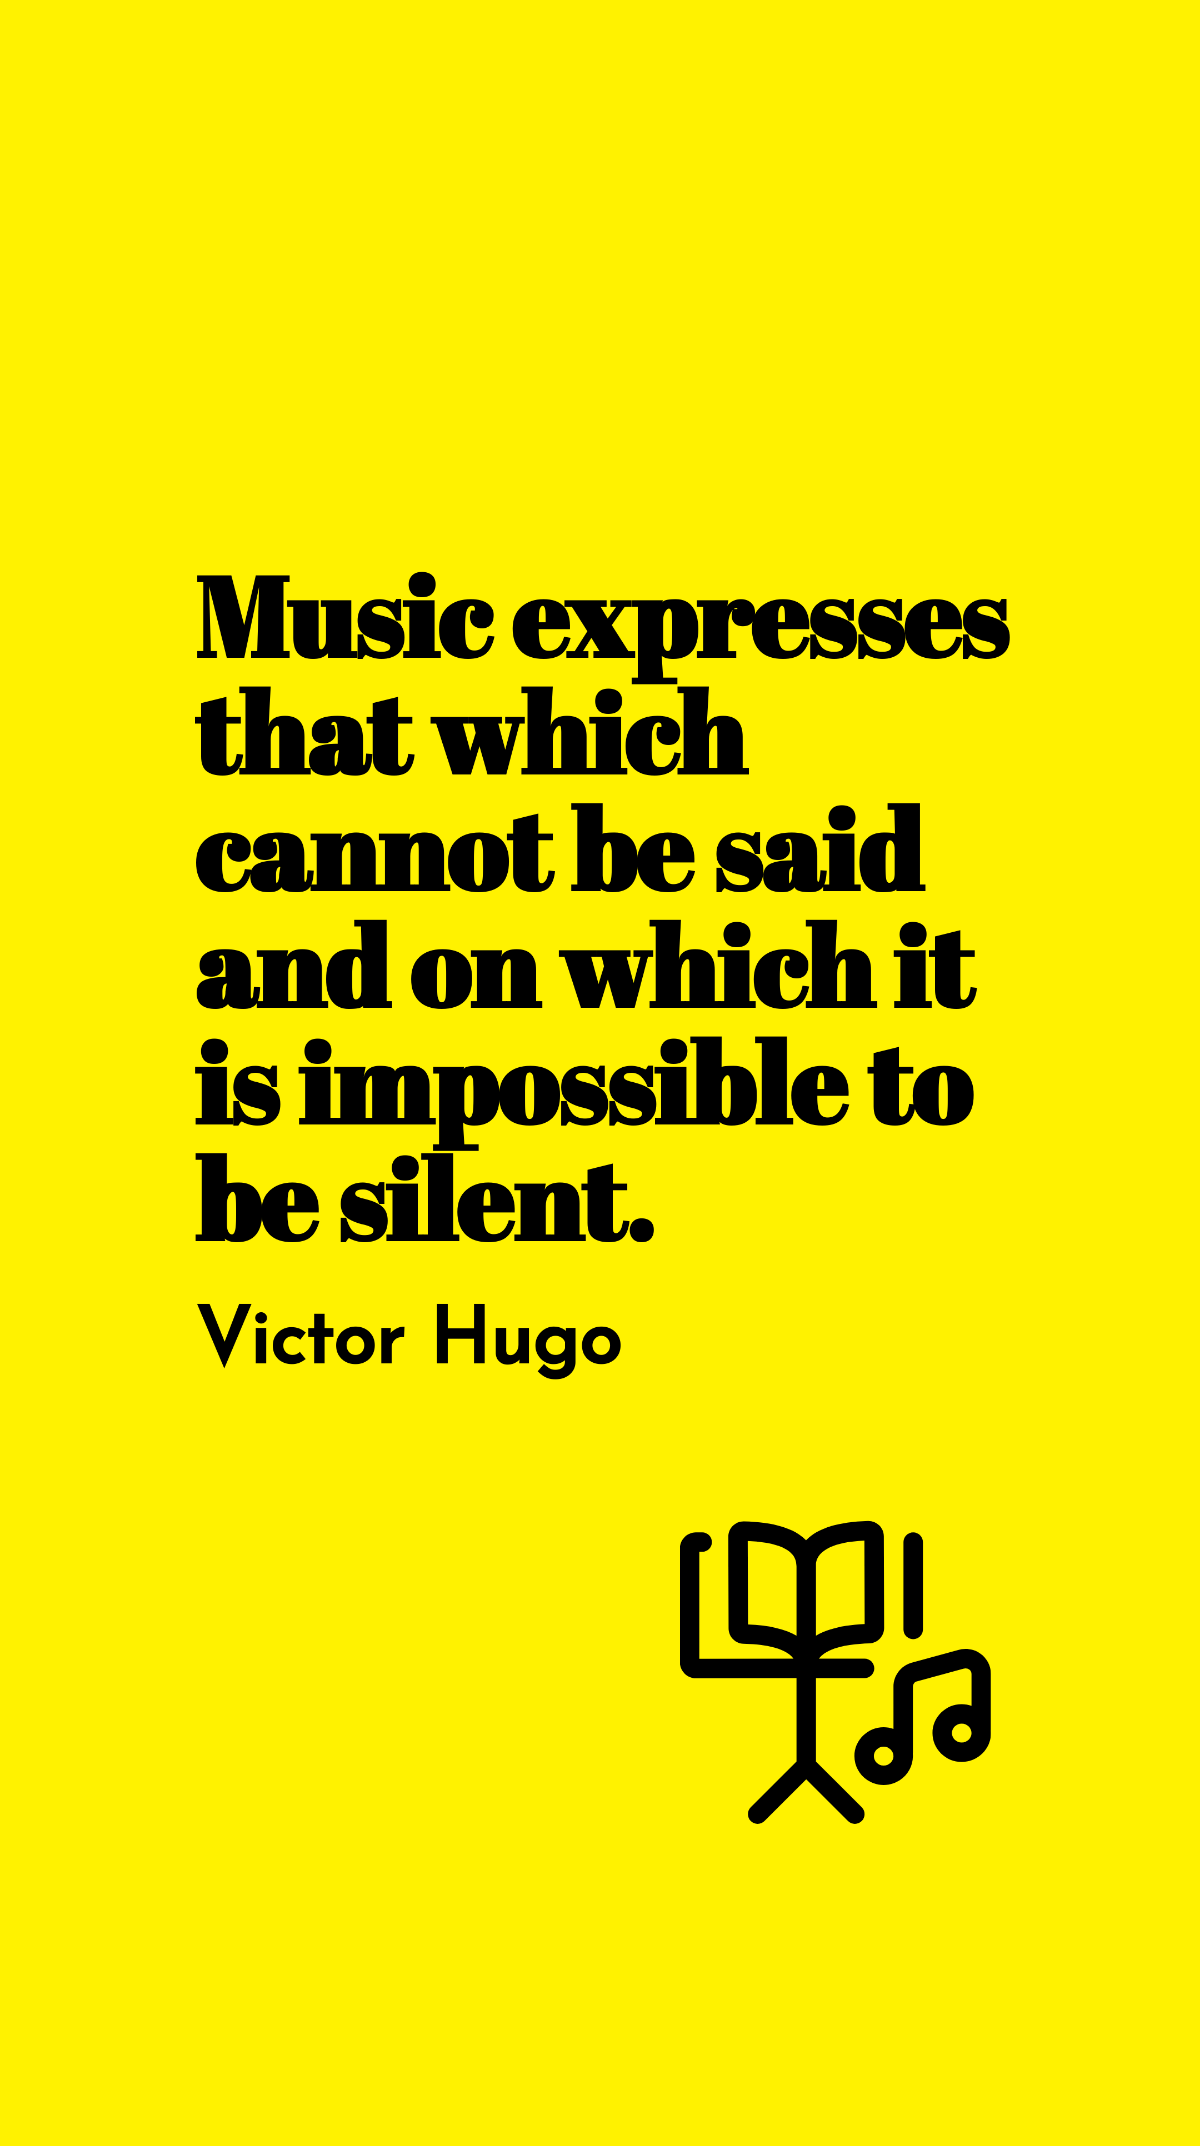 Victor Hugo - Music expresses that which cannot be said and on which it is impossible to be silent. Template